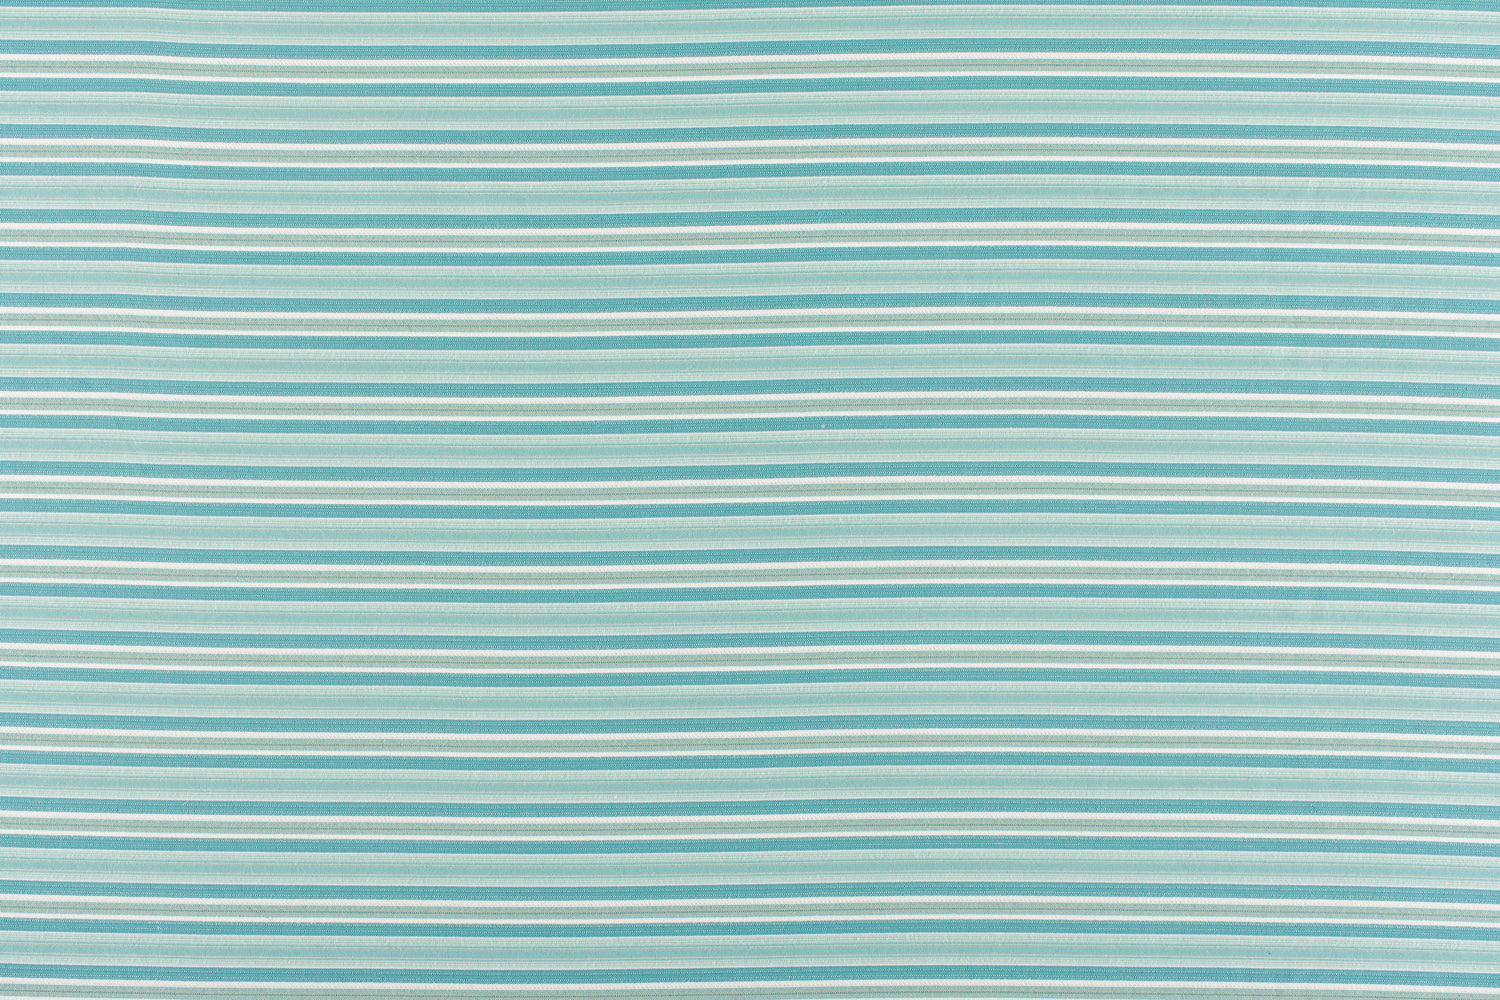 Steps Beach fabric in turquoise color - pattern number WR 00022661 - by Scalamandre in the Old World Weavers collection